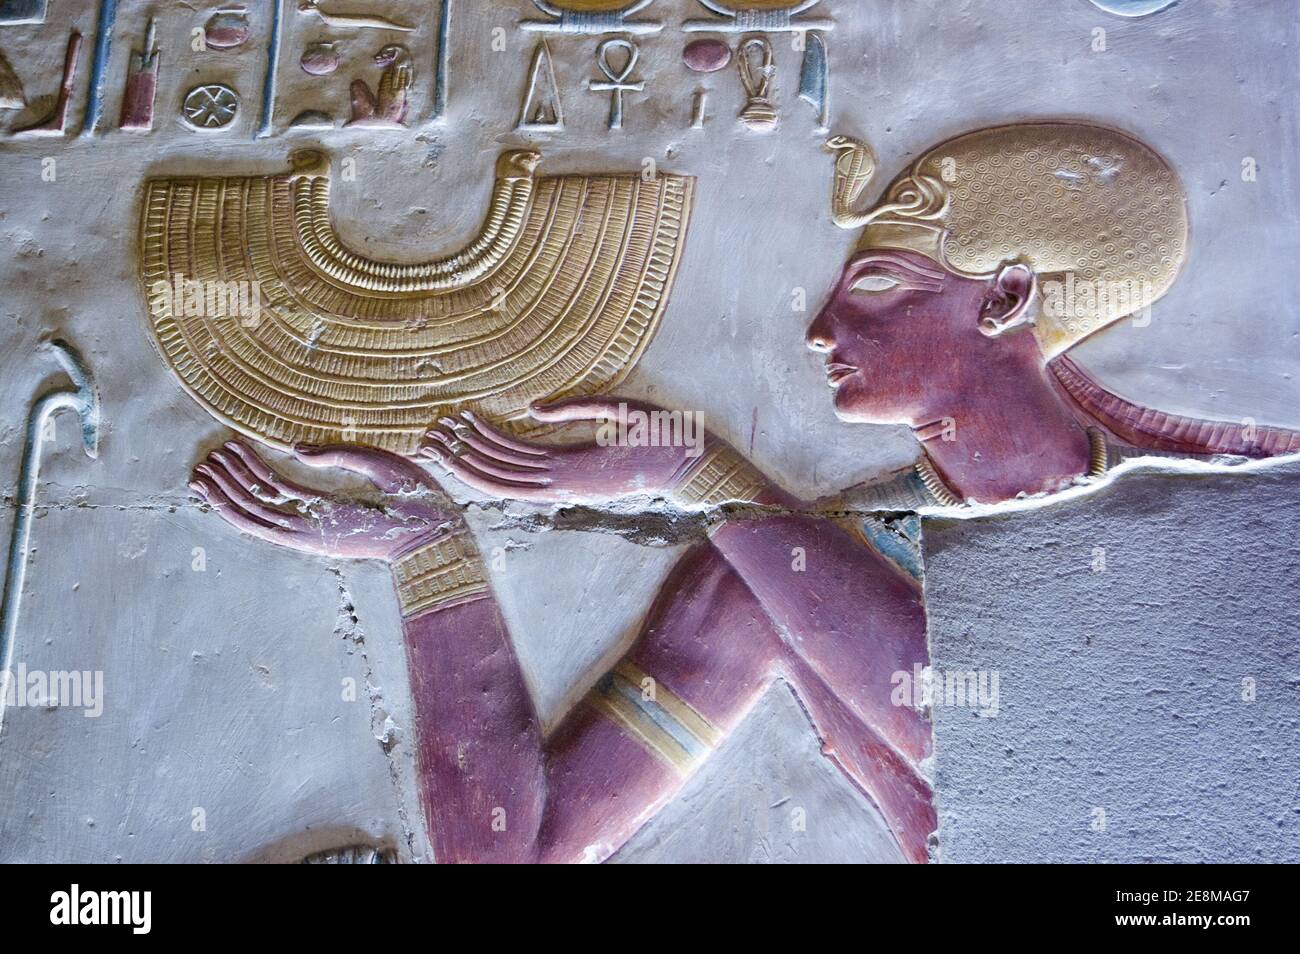 Ancient Egyptian bas relief carving showing the Pharaoh Seti I holding a gold collar style necklace. Abydos Temple, el Balyana, Egypt. Ancient carving Stock Photo